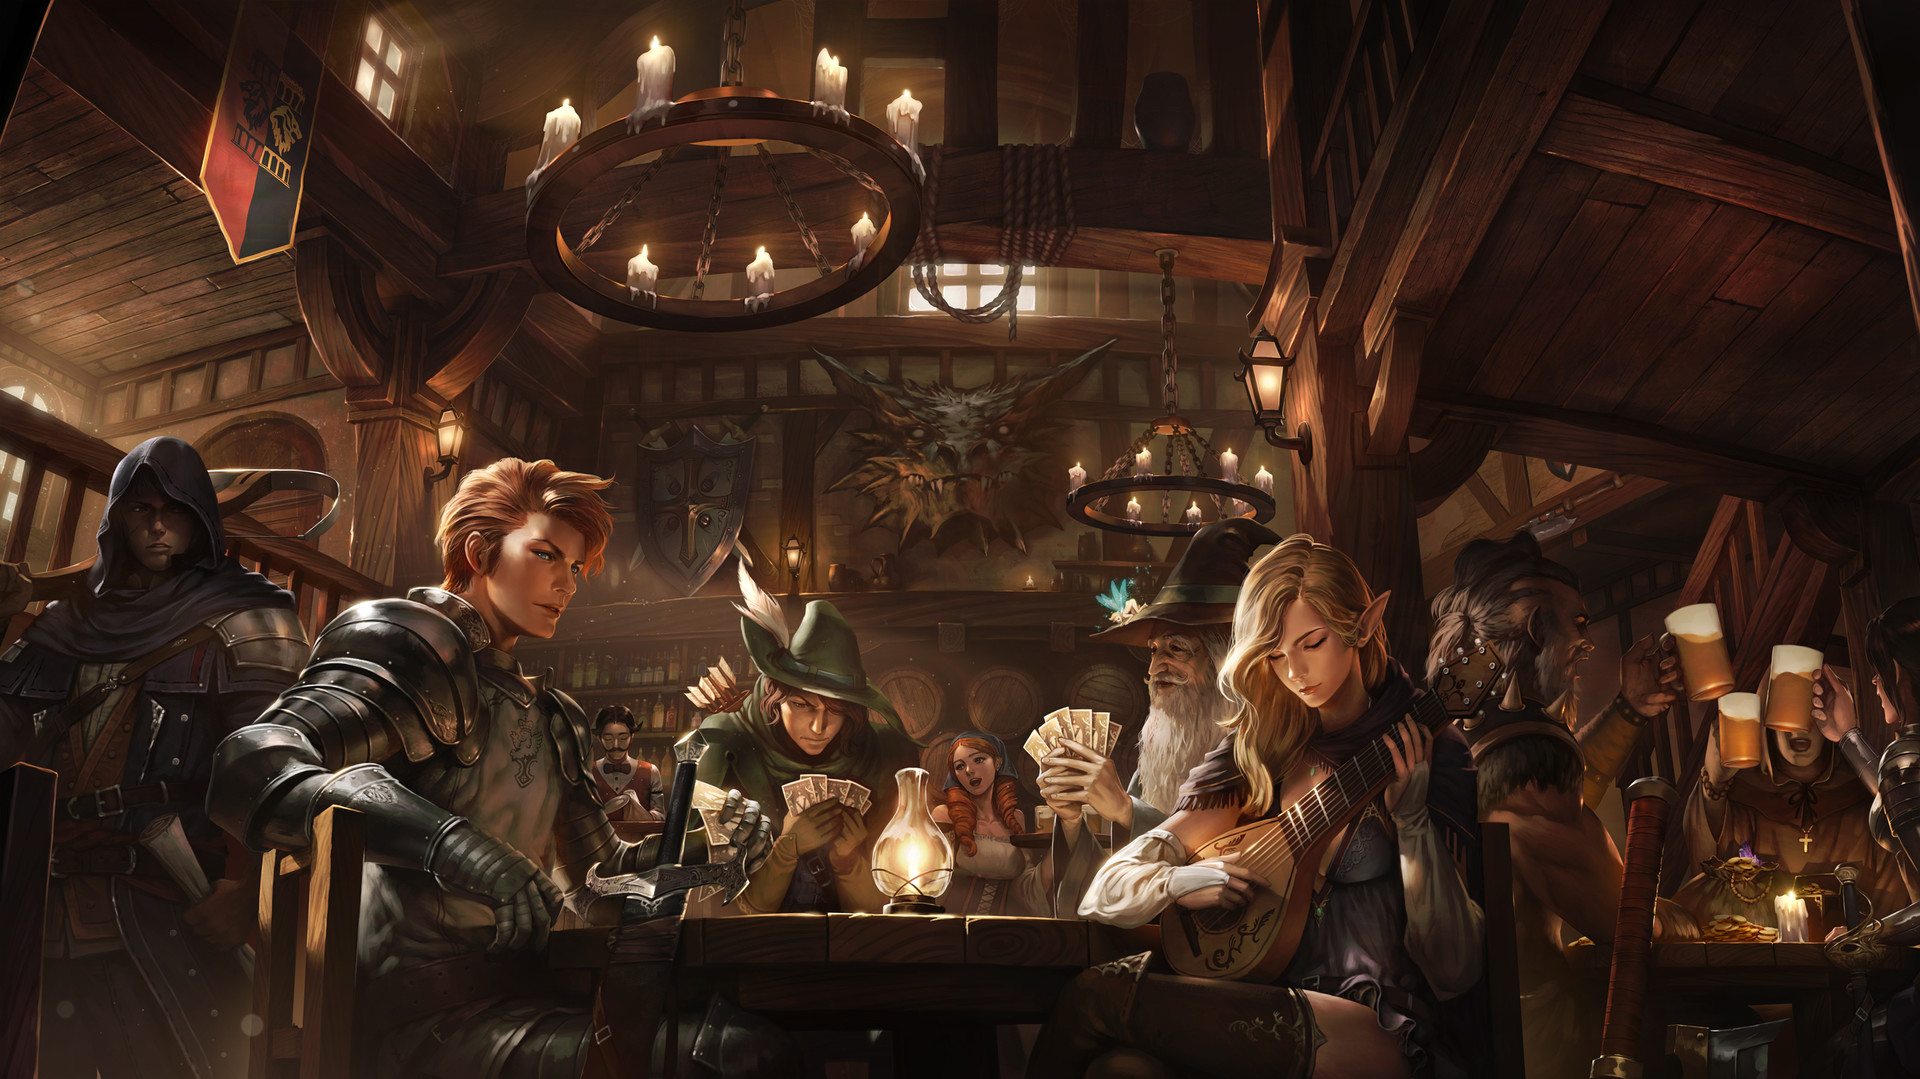 Fantasy Art Pointed Ears Tavern Candles Dungeons Dragons 1920x1079